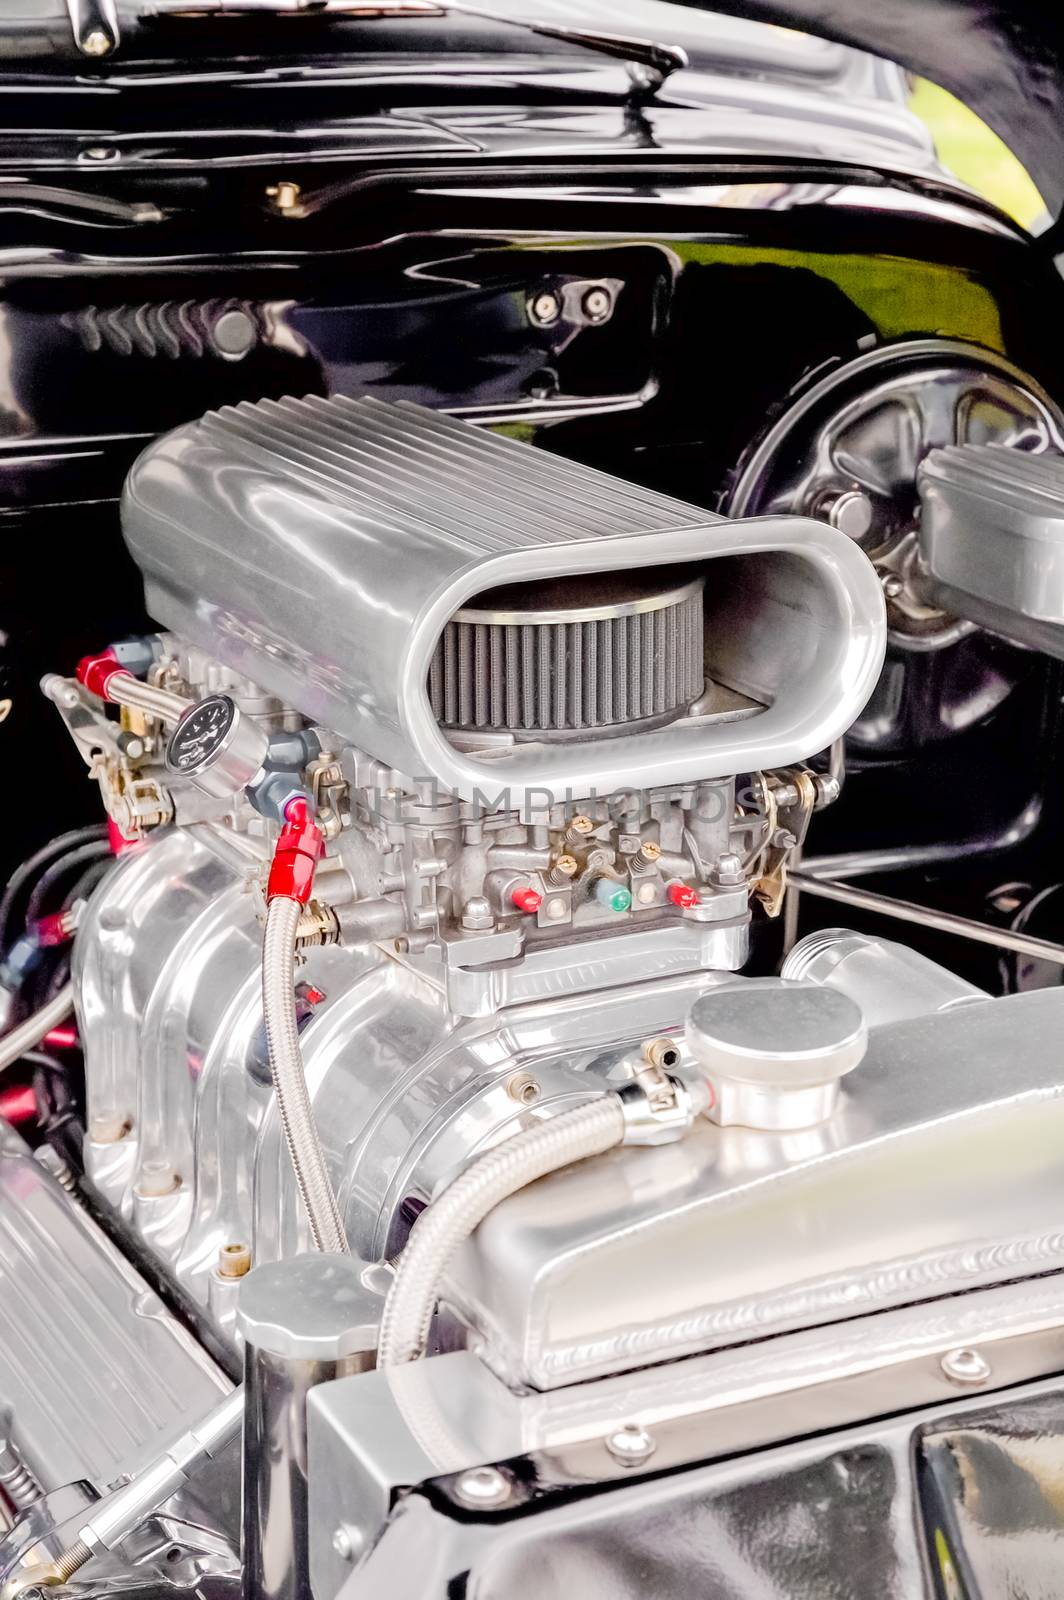 chromed engine and supercharger on a high performance vehicle